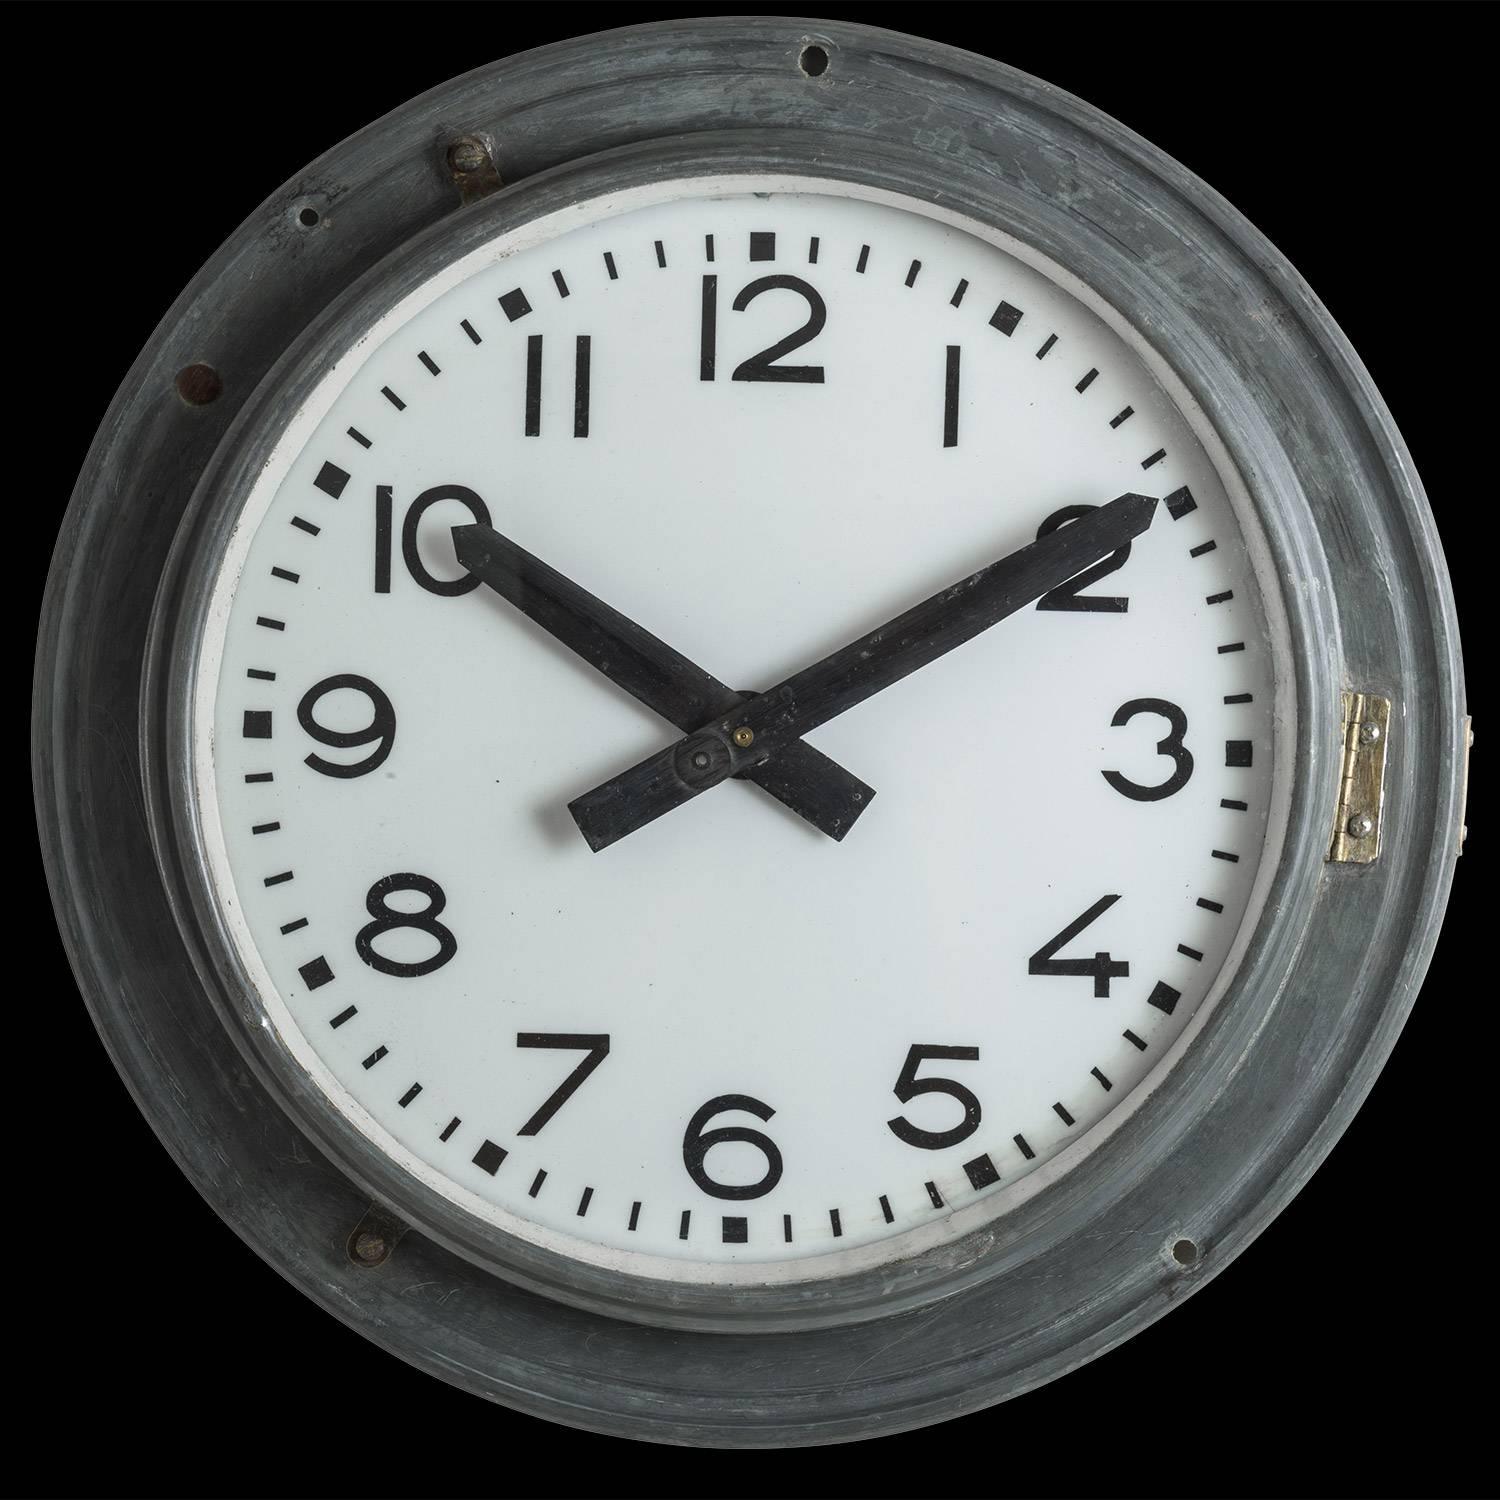 Zinc wrapped factory clock, produced by Brillié.